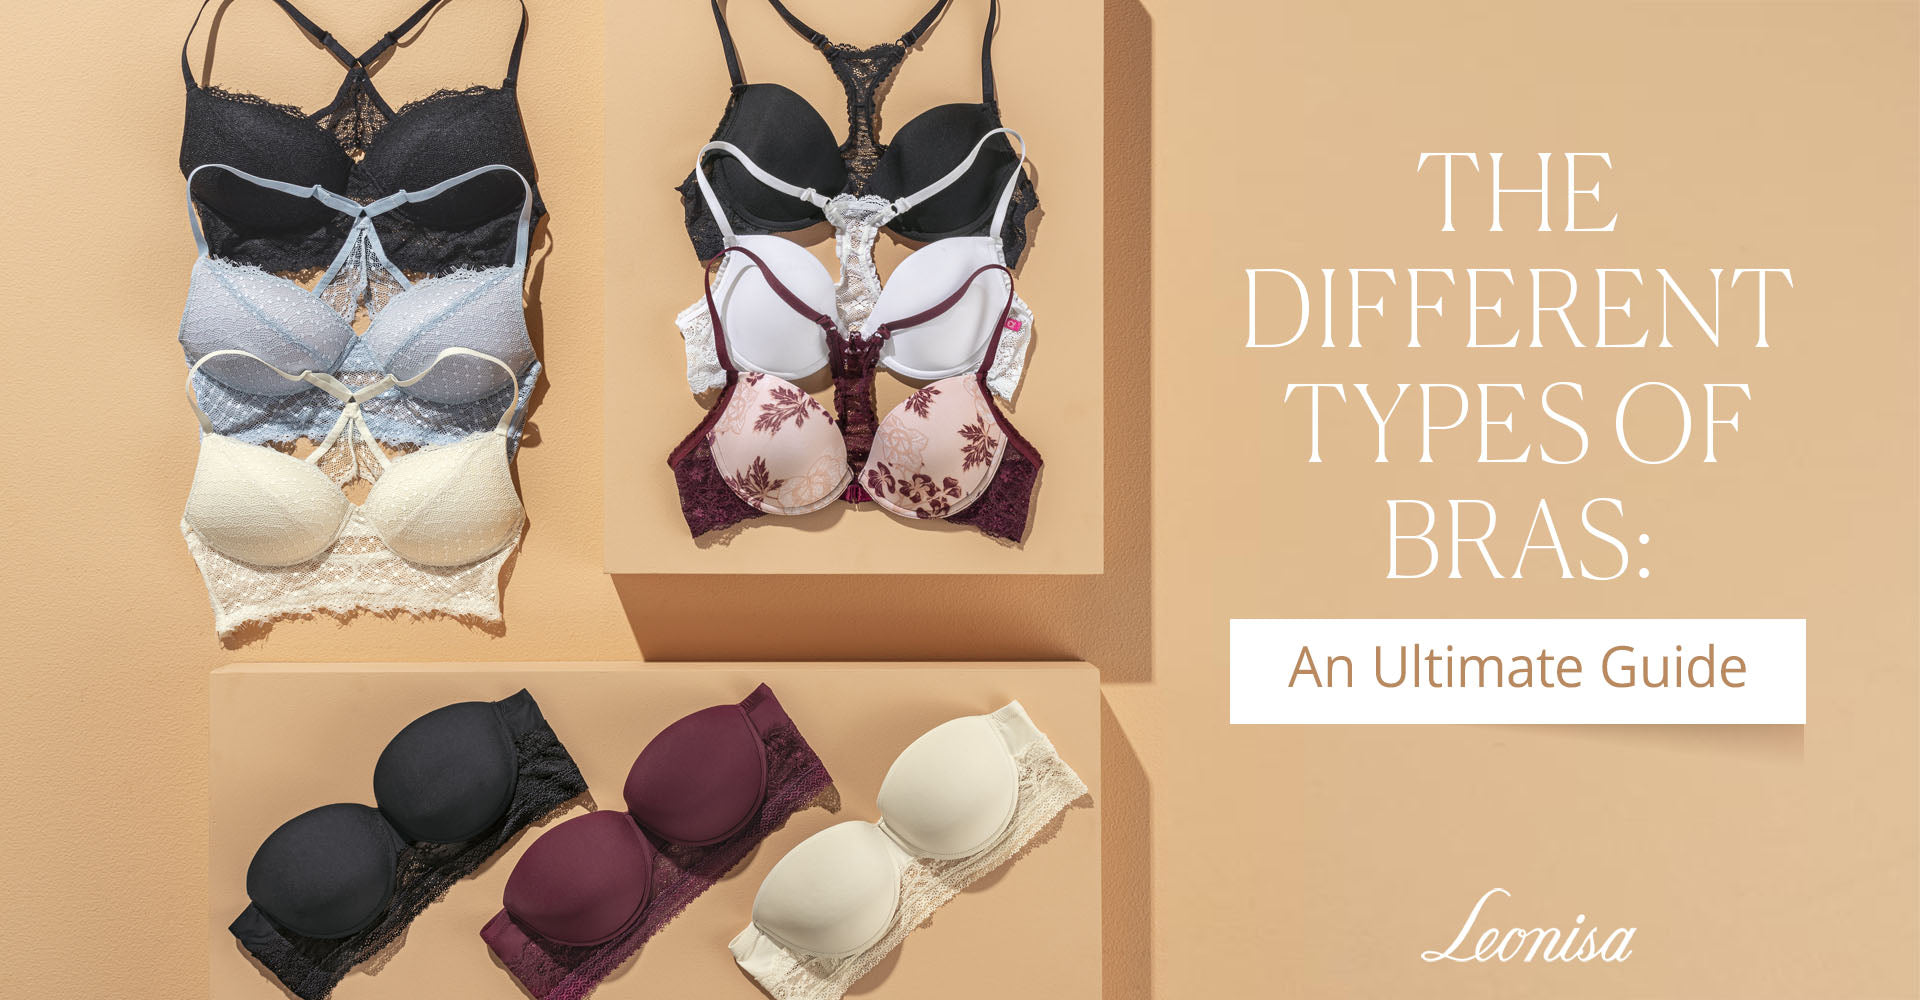 The Different Types of Bras: An Ultimate Guide - Leonisa